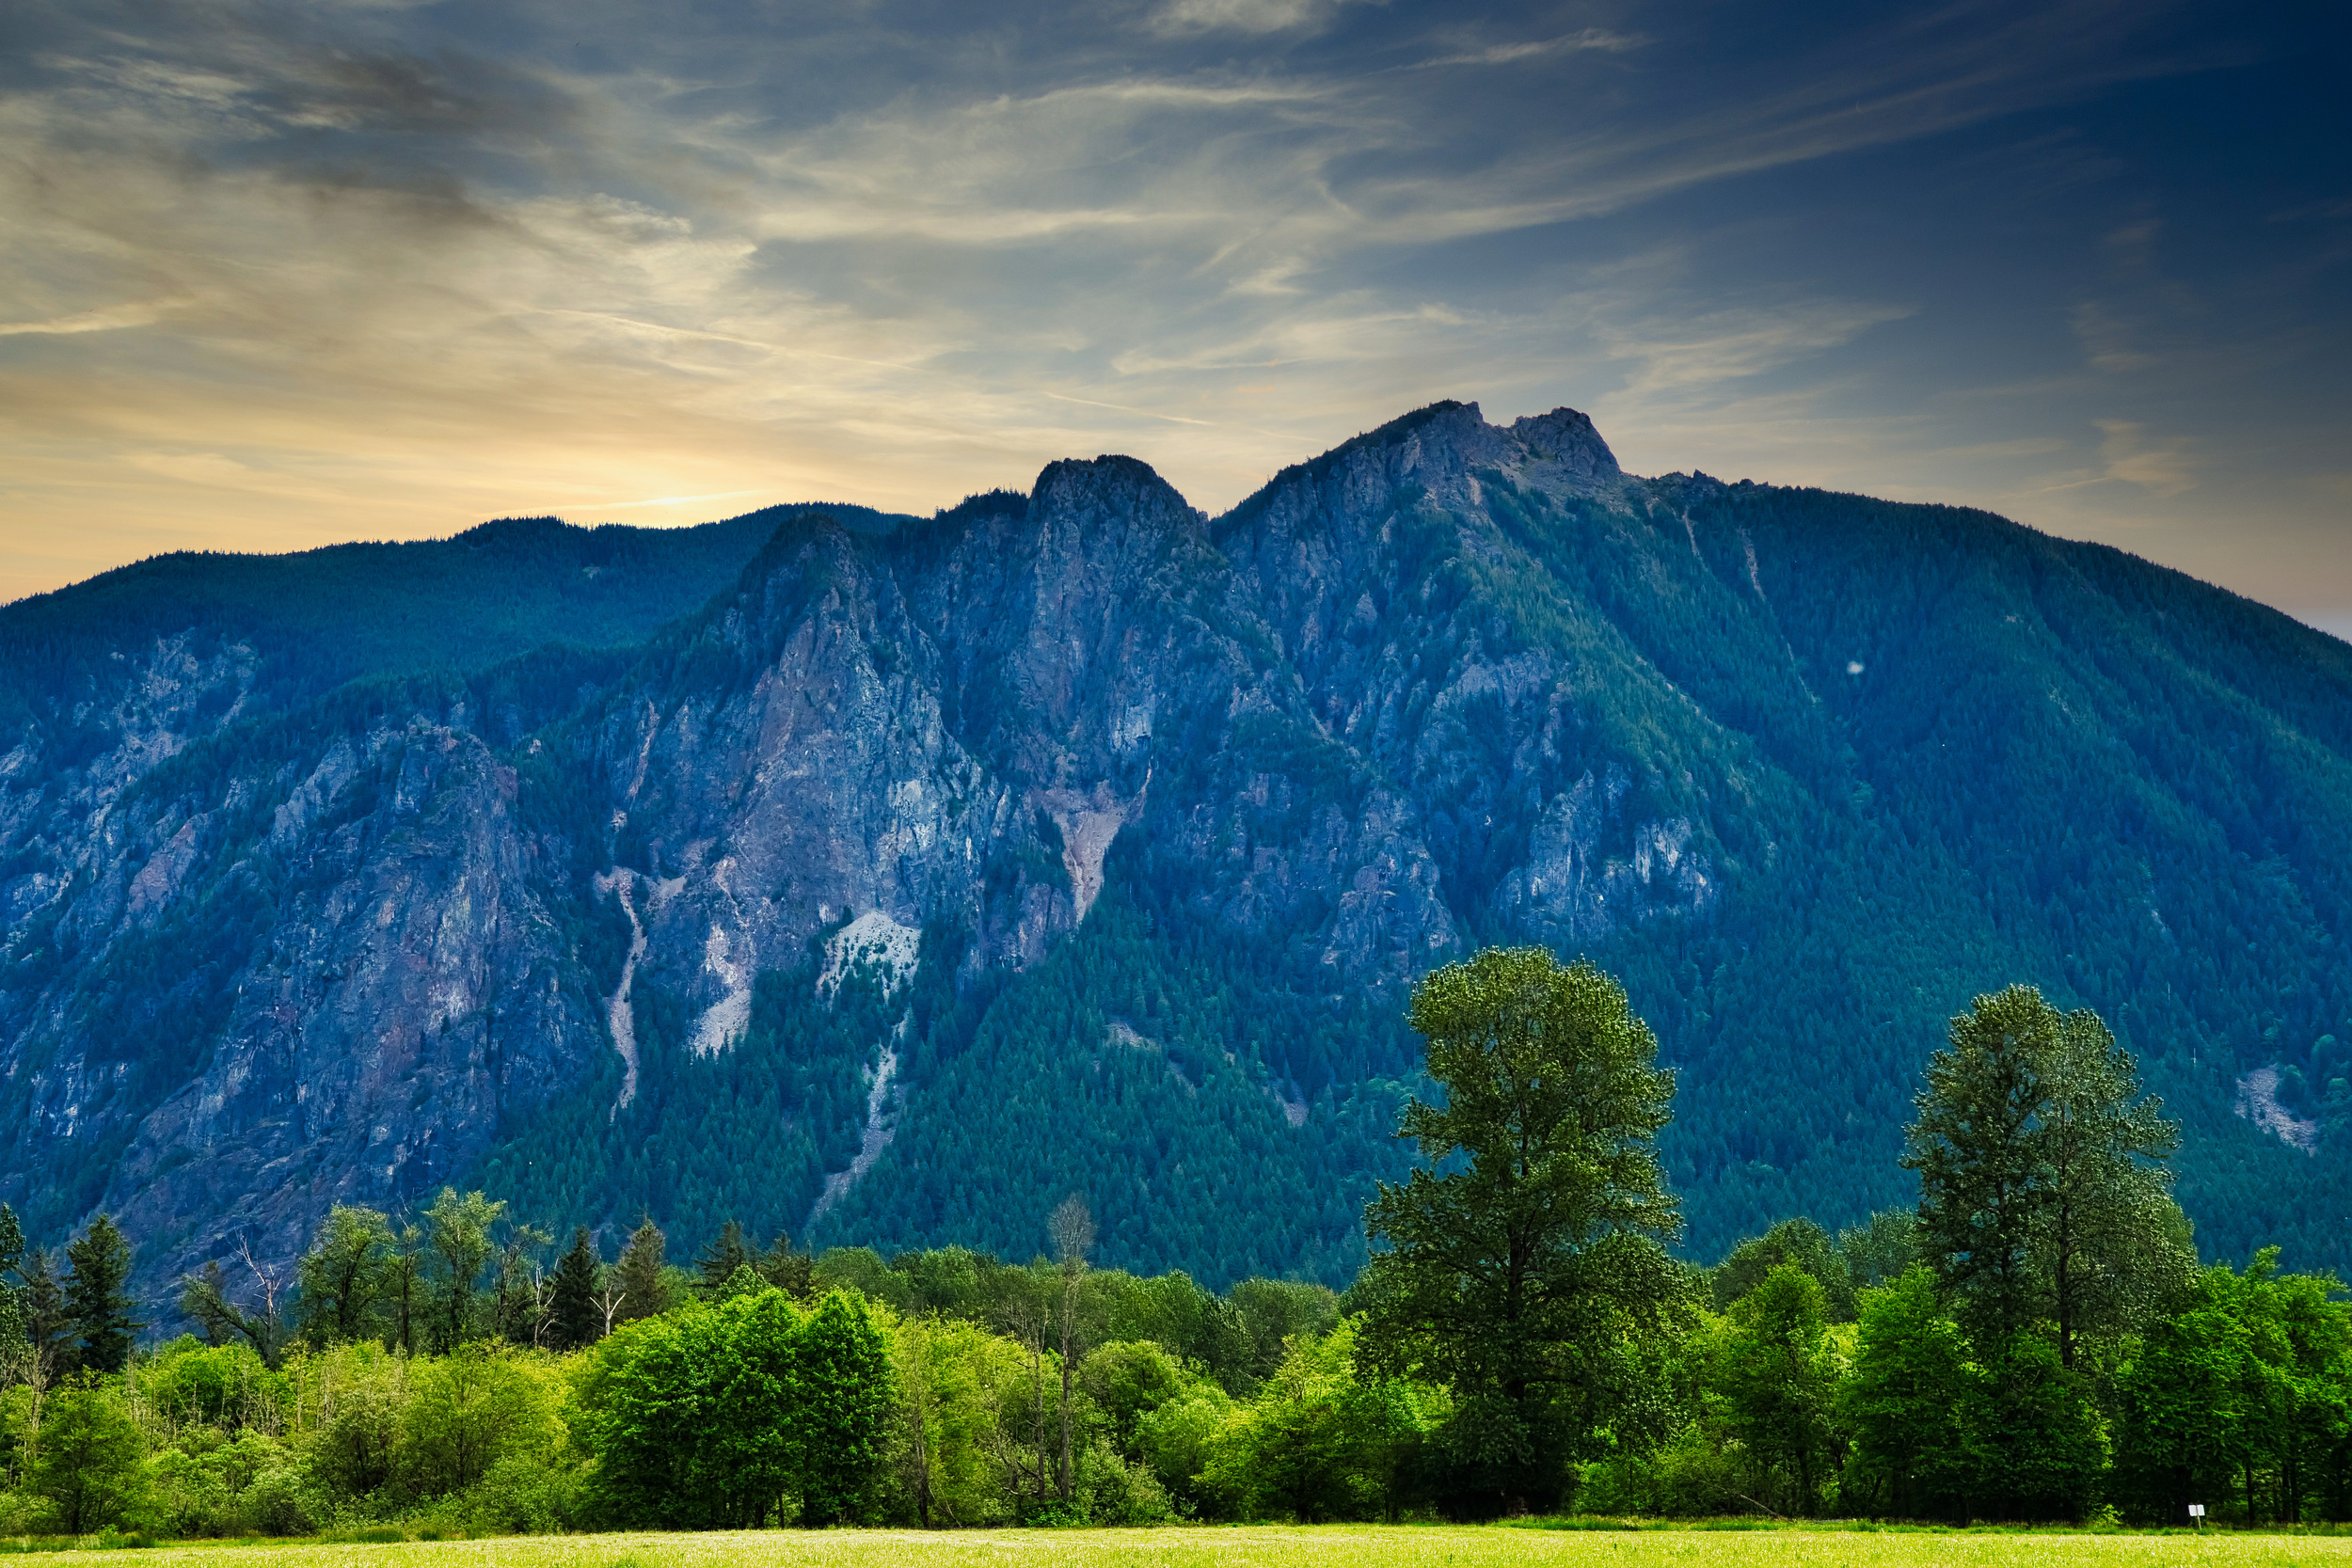 <p>Another mountain town, North Bend is located closer to the city, just past the Issaquah Alps. The town itself has spectacular views of Mount Si, which has many options for trails. Just remember snow can fall at higher elevations here in the winter, so be prepared!</p><p><a href='https://www.msn.com/en-us/community/channel/vid-cj9pqbr0vn9in2b6ddcd8sfgpfq6x6utp44fssrv6mc2gtybw0us'>Follow us on MSN to see more of our exclusive lifestyle content.</a></p>